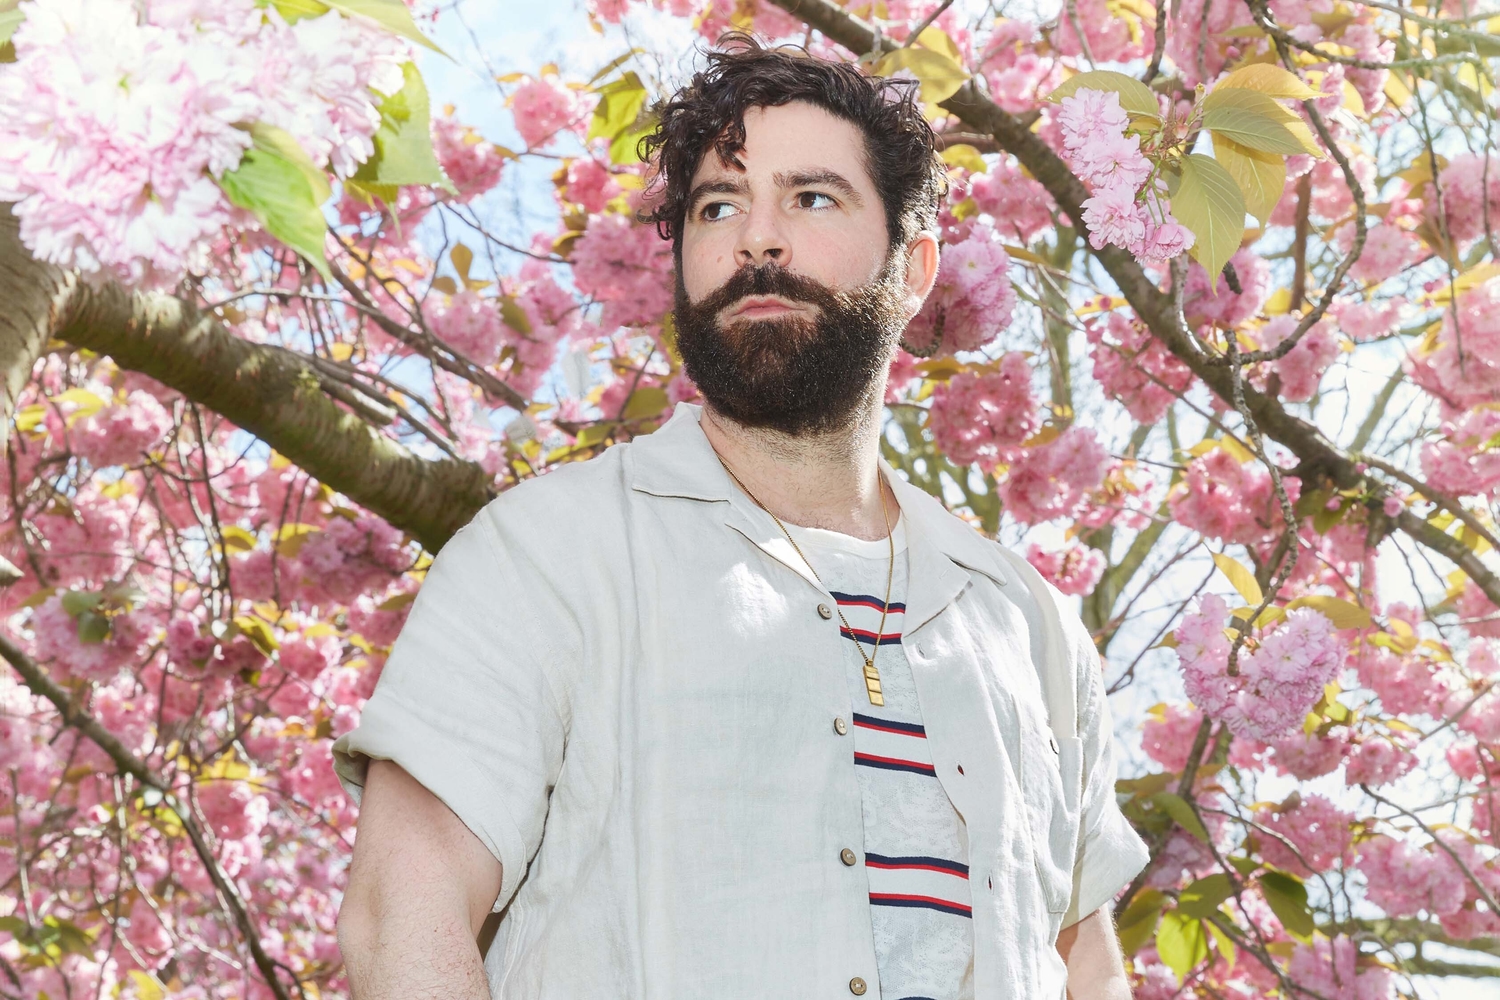 Yannis Philippakis on working with Tony Allen, their collaborative project Yannis & The Yaw, and new EP ‘Lagos, Paris, London’